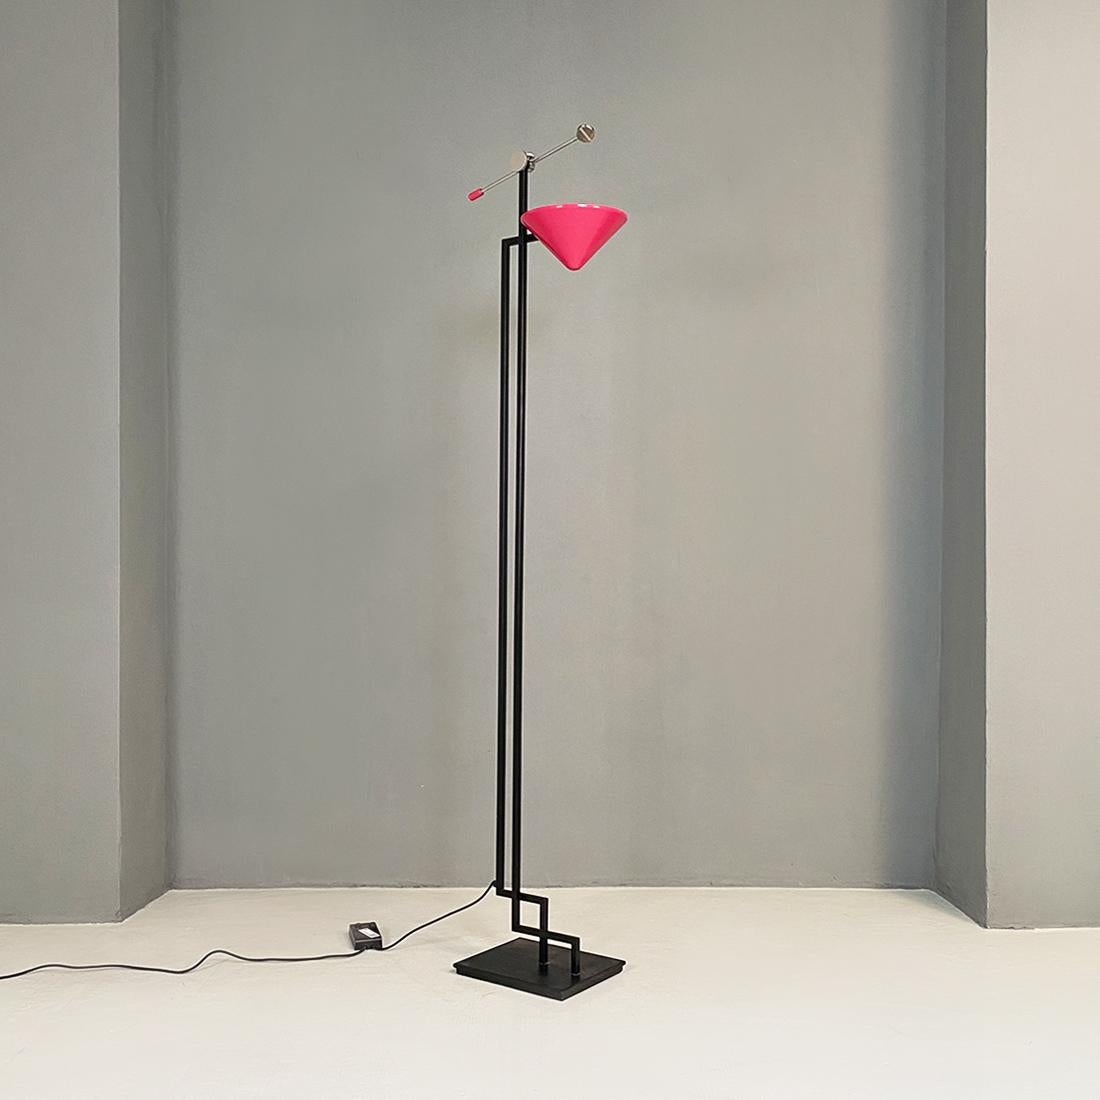 Italian Modern Metal Structure and Magenta Conical Diffuser Floor Lamp, 1980s For Sale 6